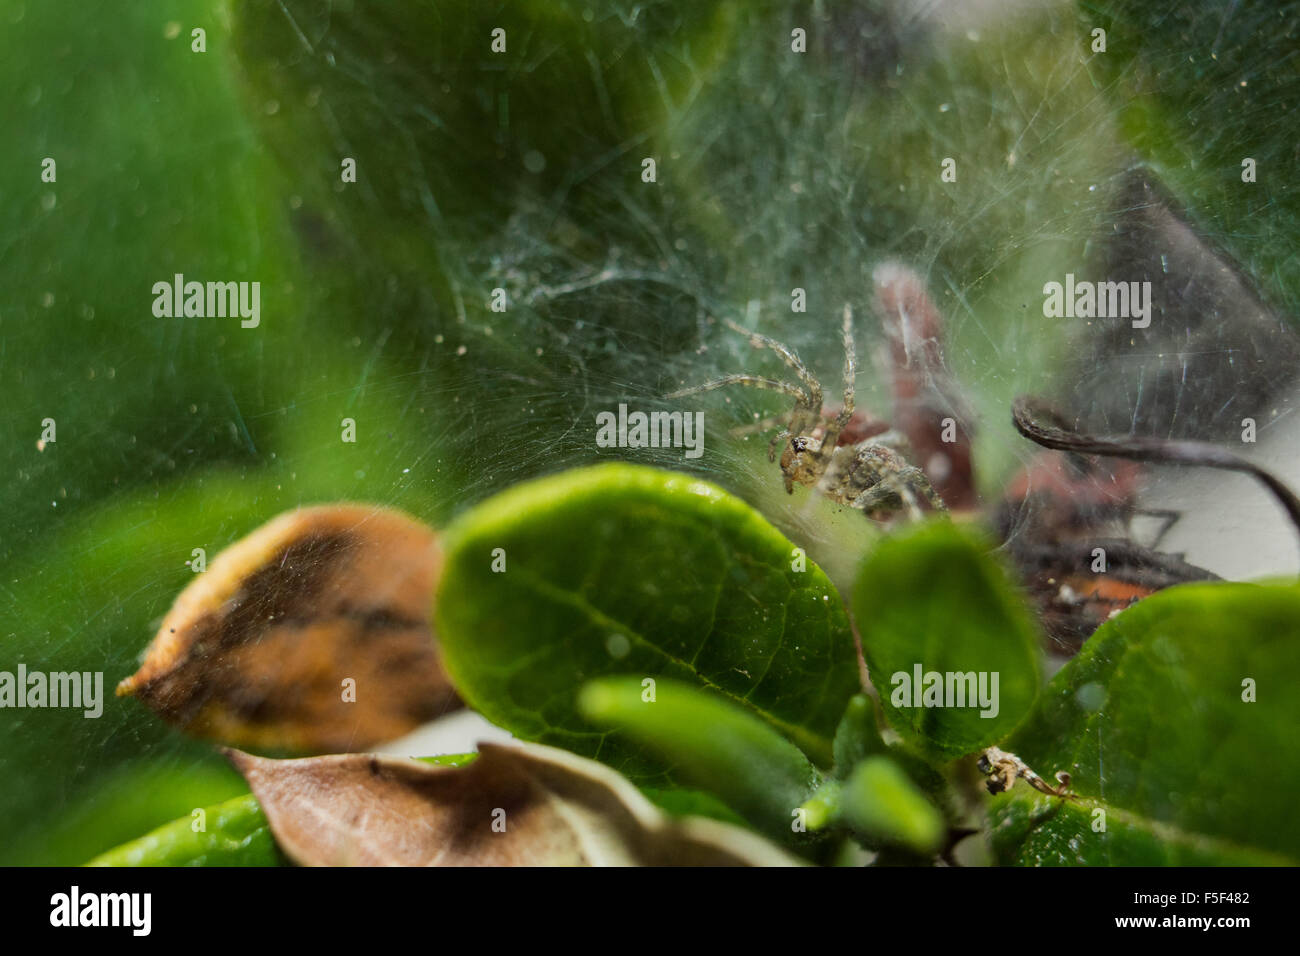 A spider sitting in a web nestled between green leaves Stock Photo